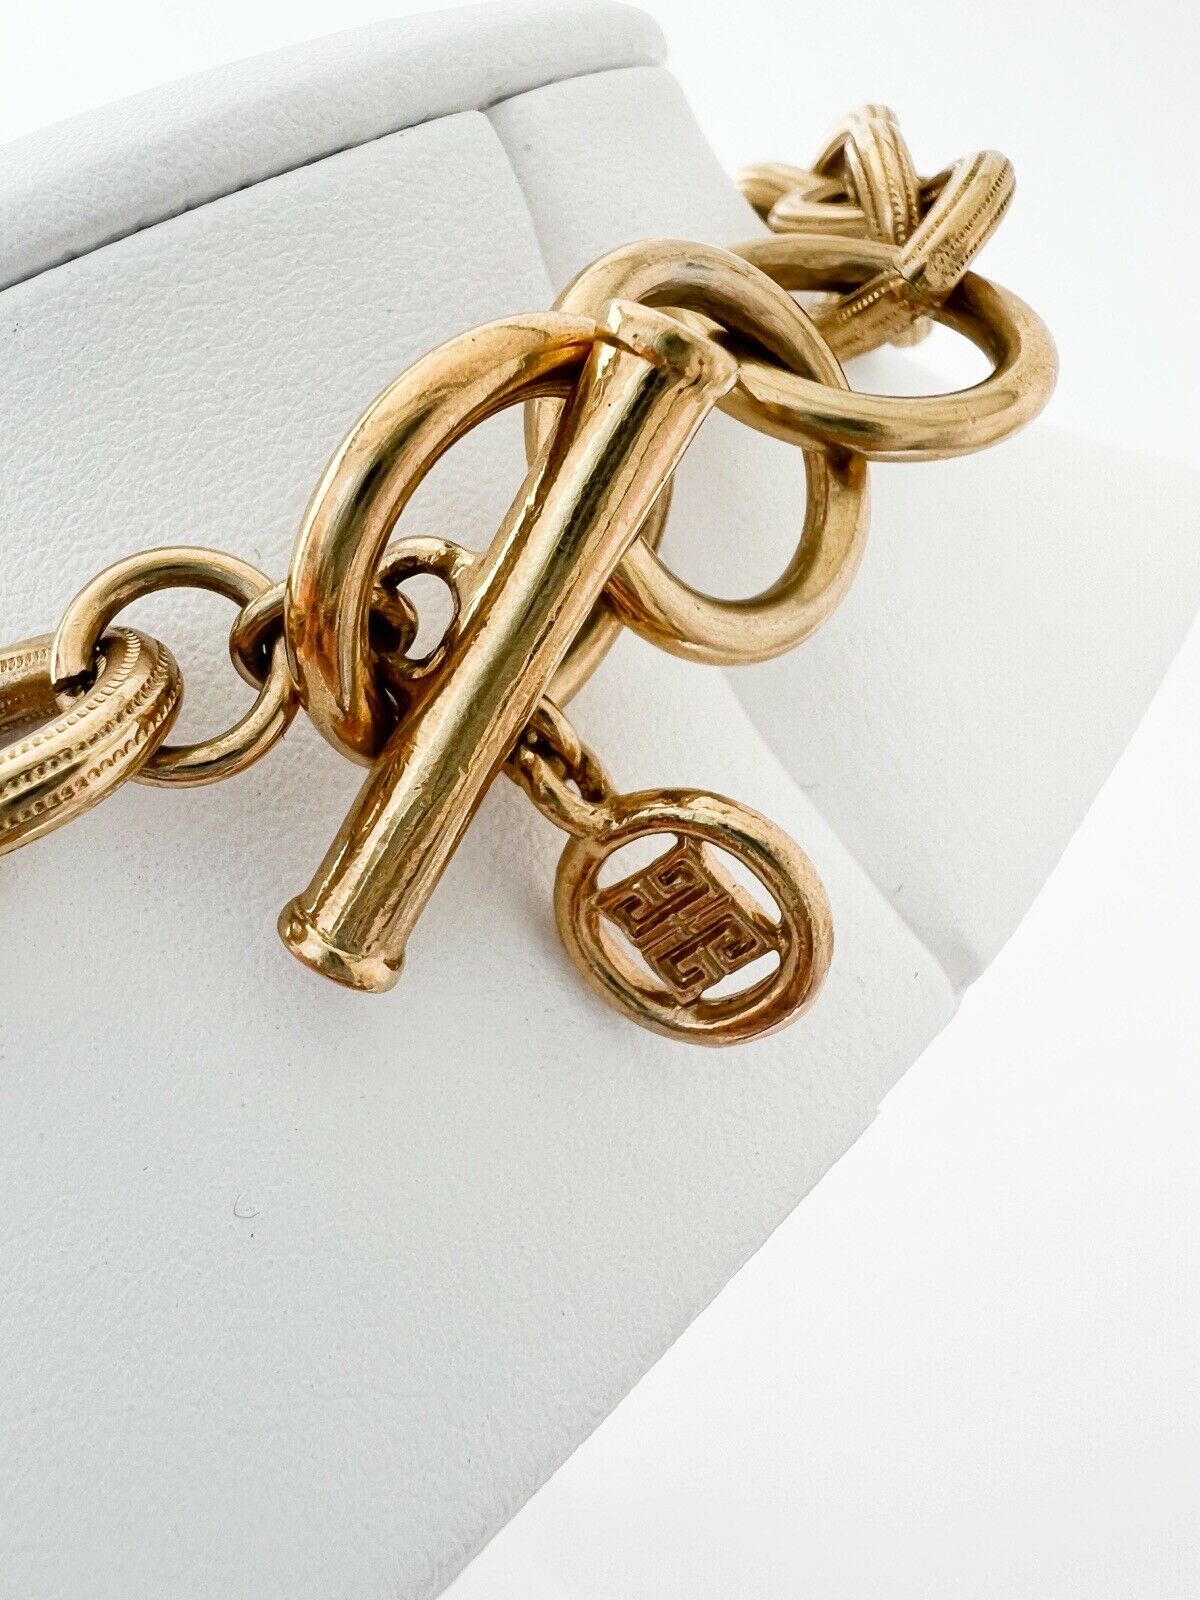 Givenchy Vintage Charm Necklace Gold